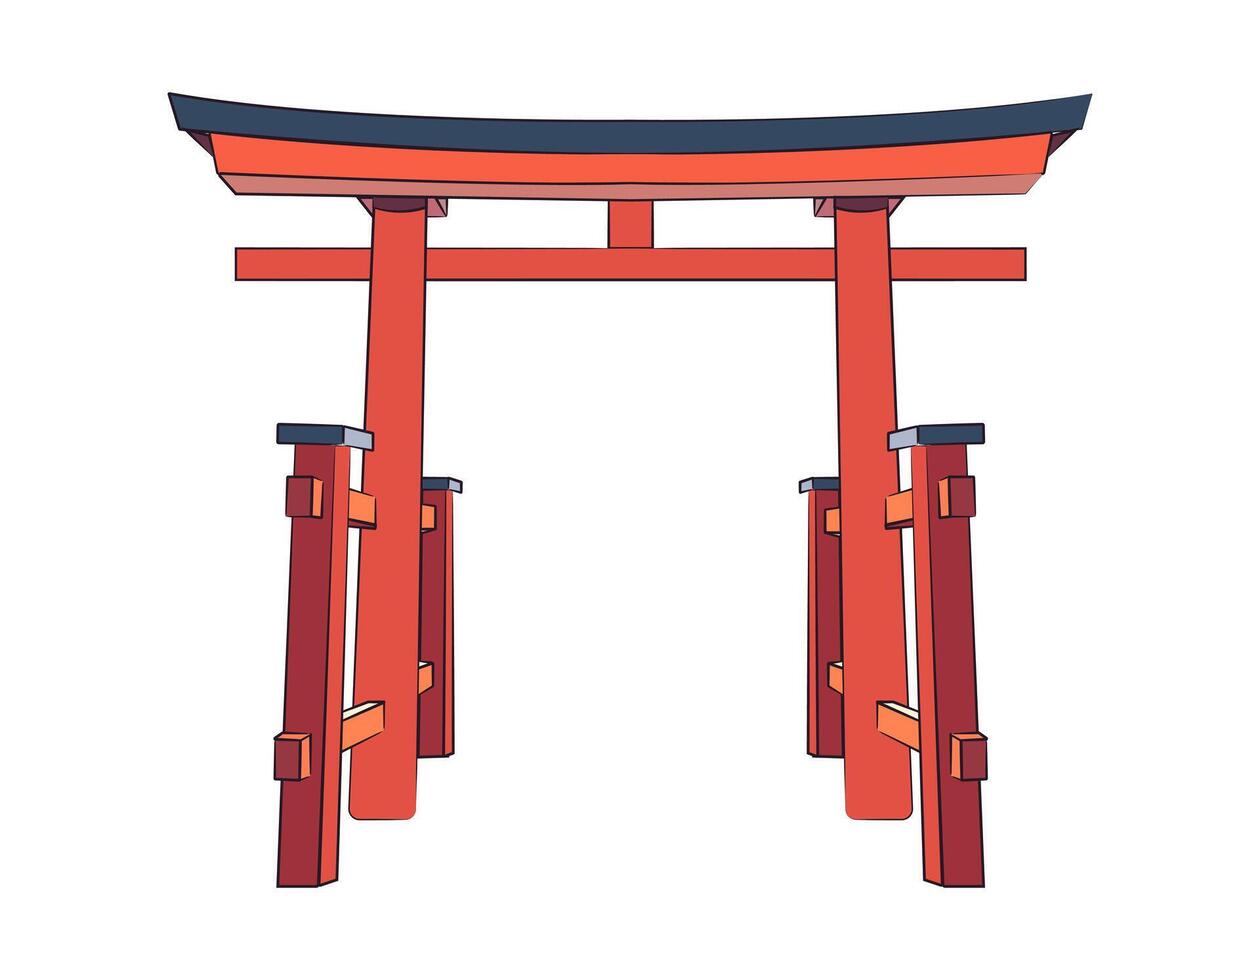 Japanese red gate of Torii Shrine. Ancient architecture of Japan. Color hand-drawn image. Isolated object on a white background. Vector illustration.